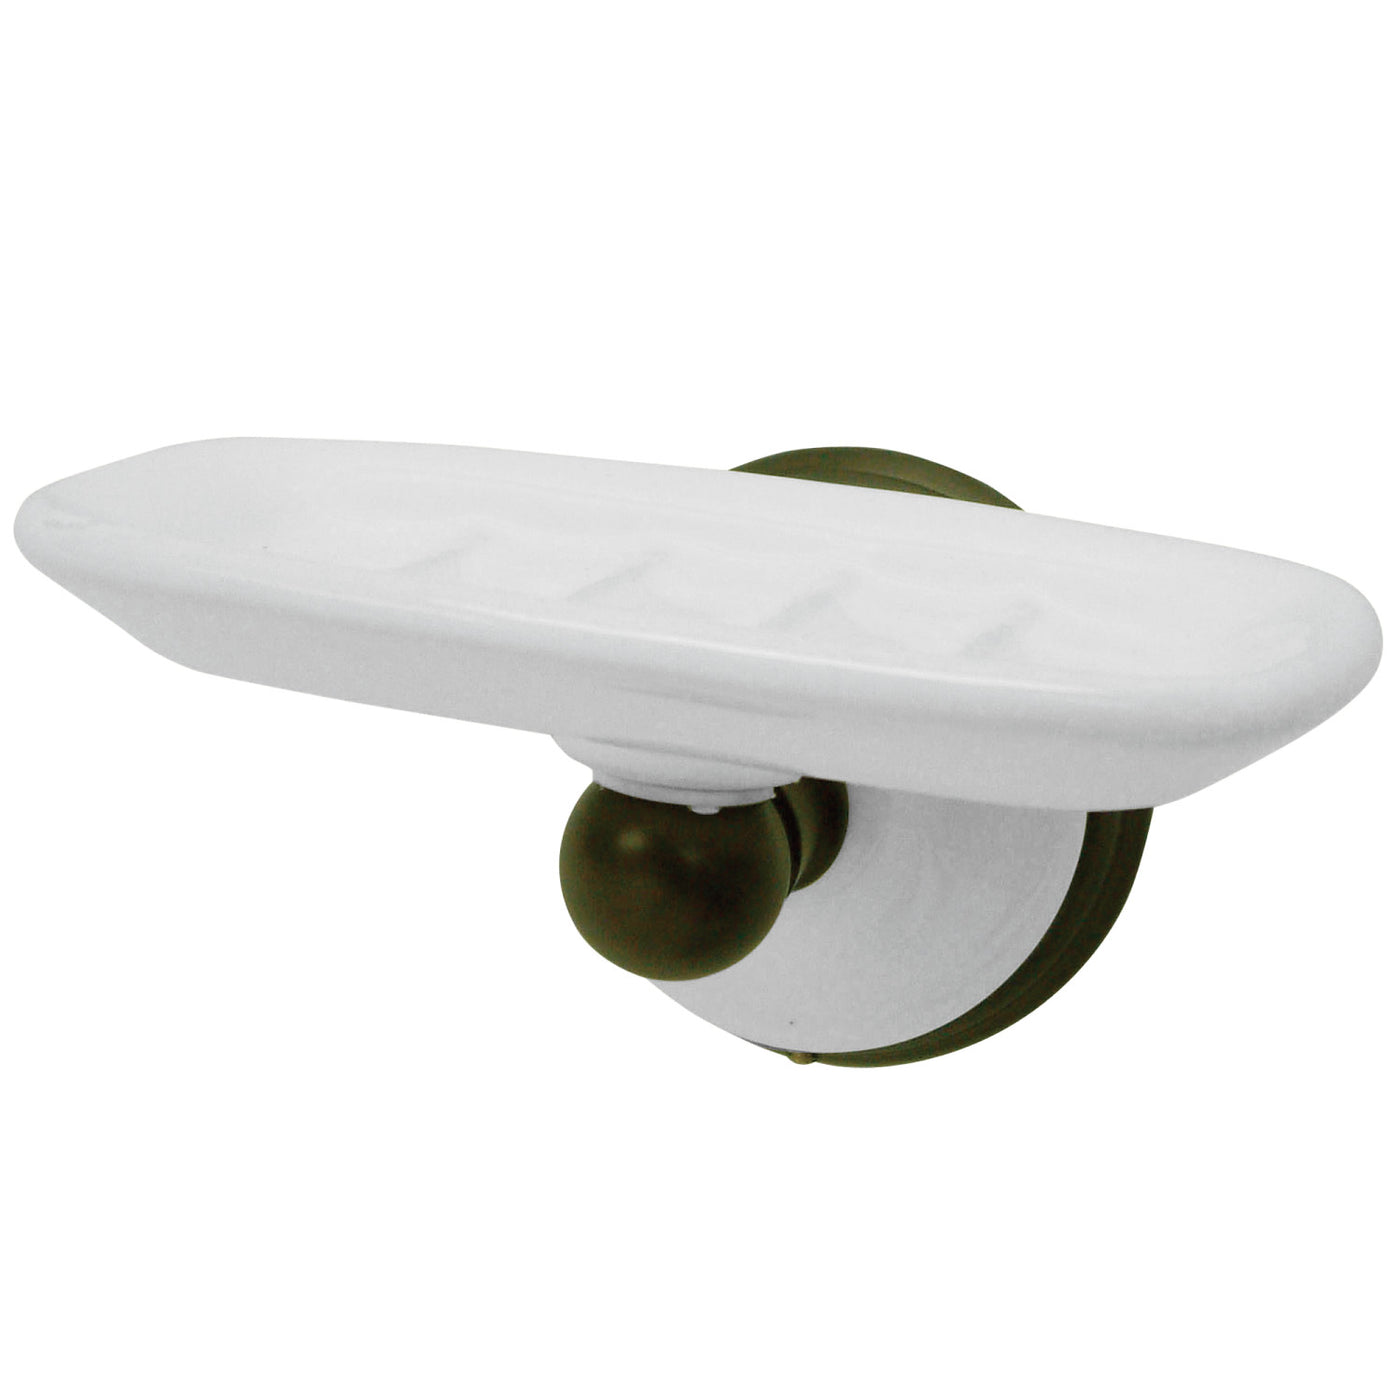 Elements of Design EBA1115ORB Wall-Mount Soap Dish Holder, Oil Rubbed Bronze